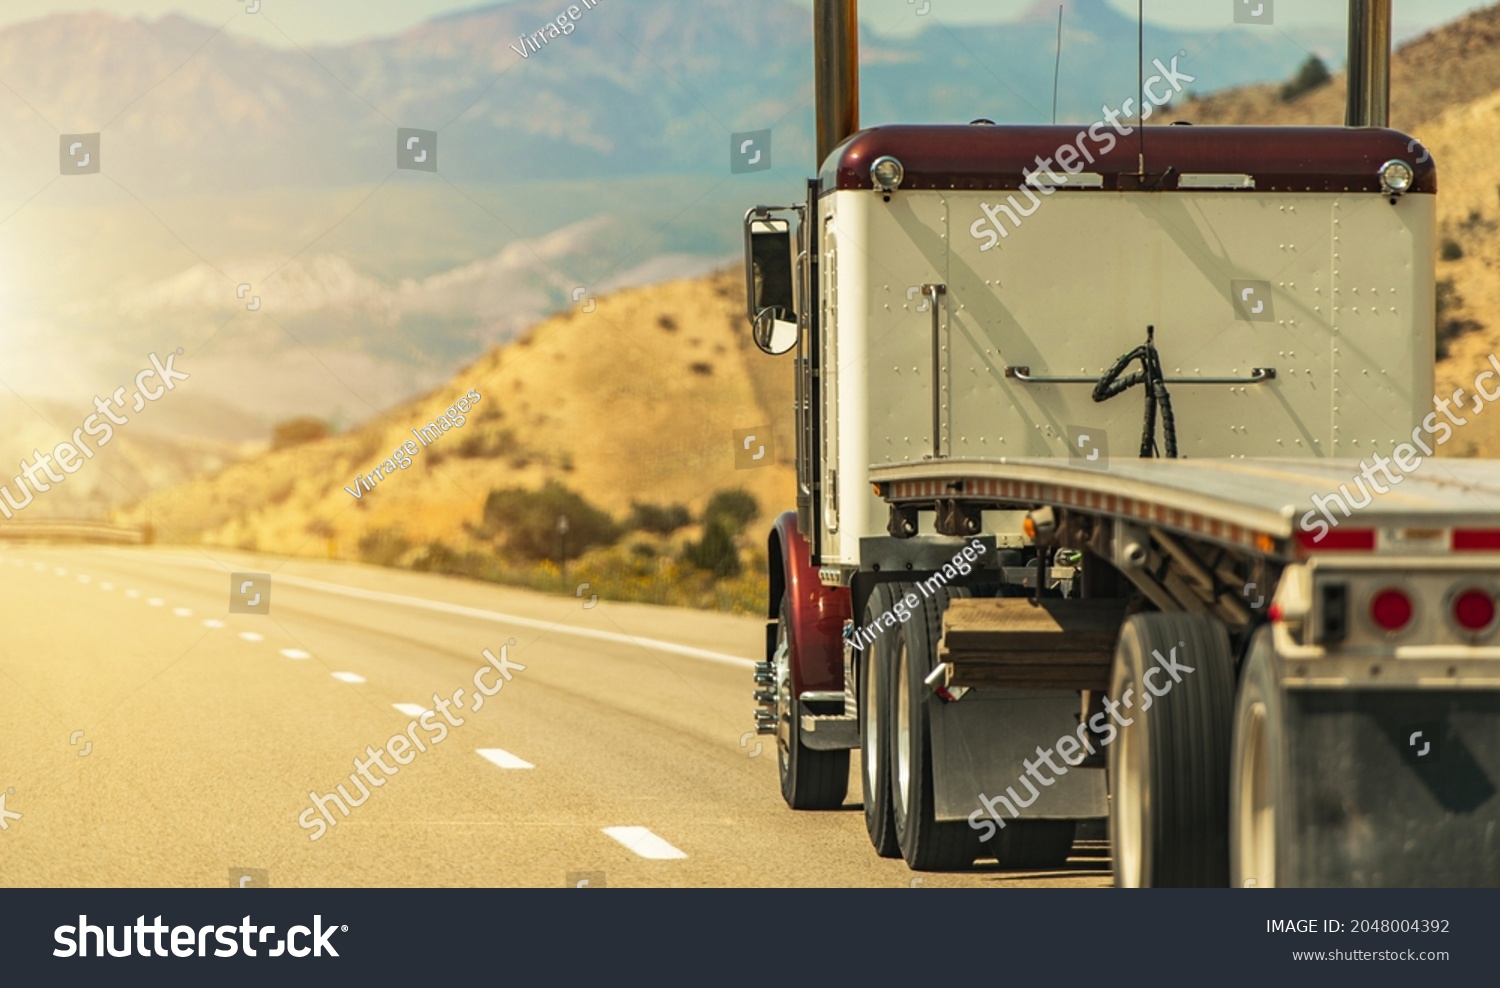 Heavy Duty Freight Theme. Semi Truck with Flatbed Trailer on a Scenic Utah Interstate 70 Highway. American Transportation Industry. #2048004392